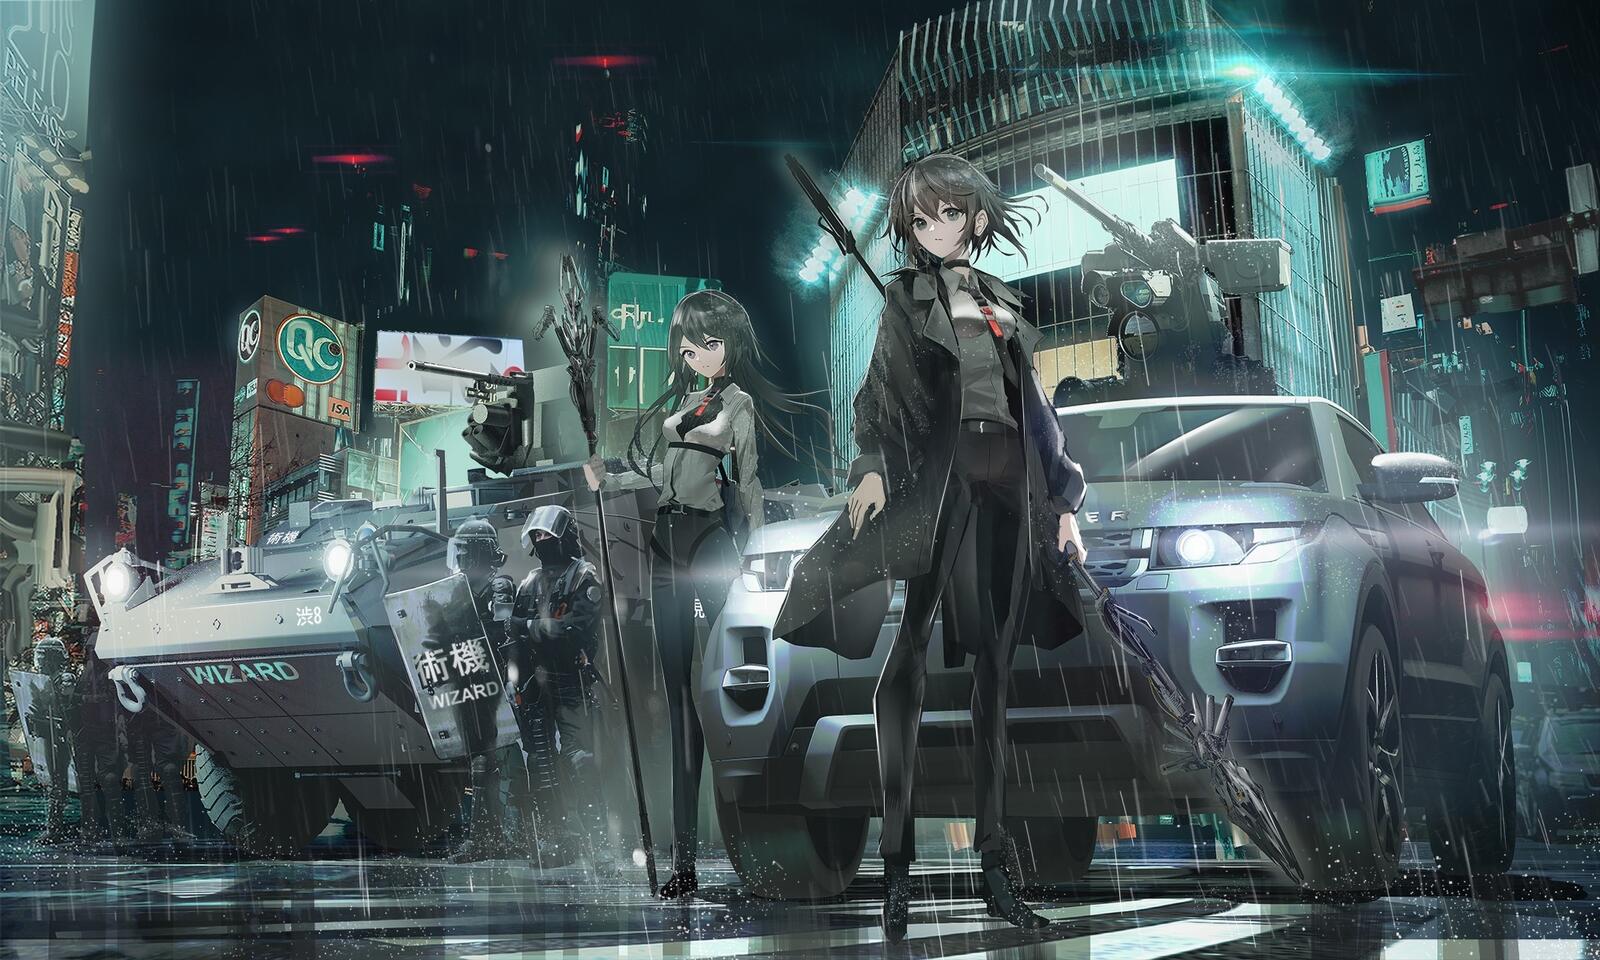 Wallpapers wallpaper anime city special forces anime girls on the desktop